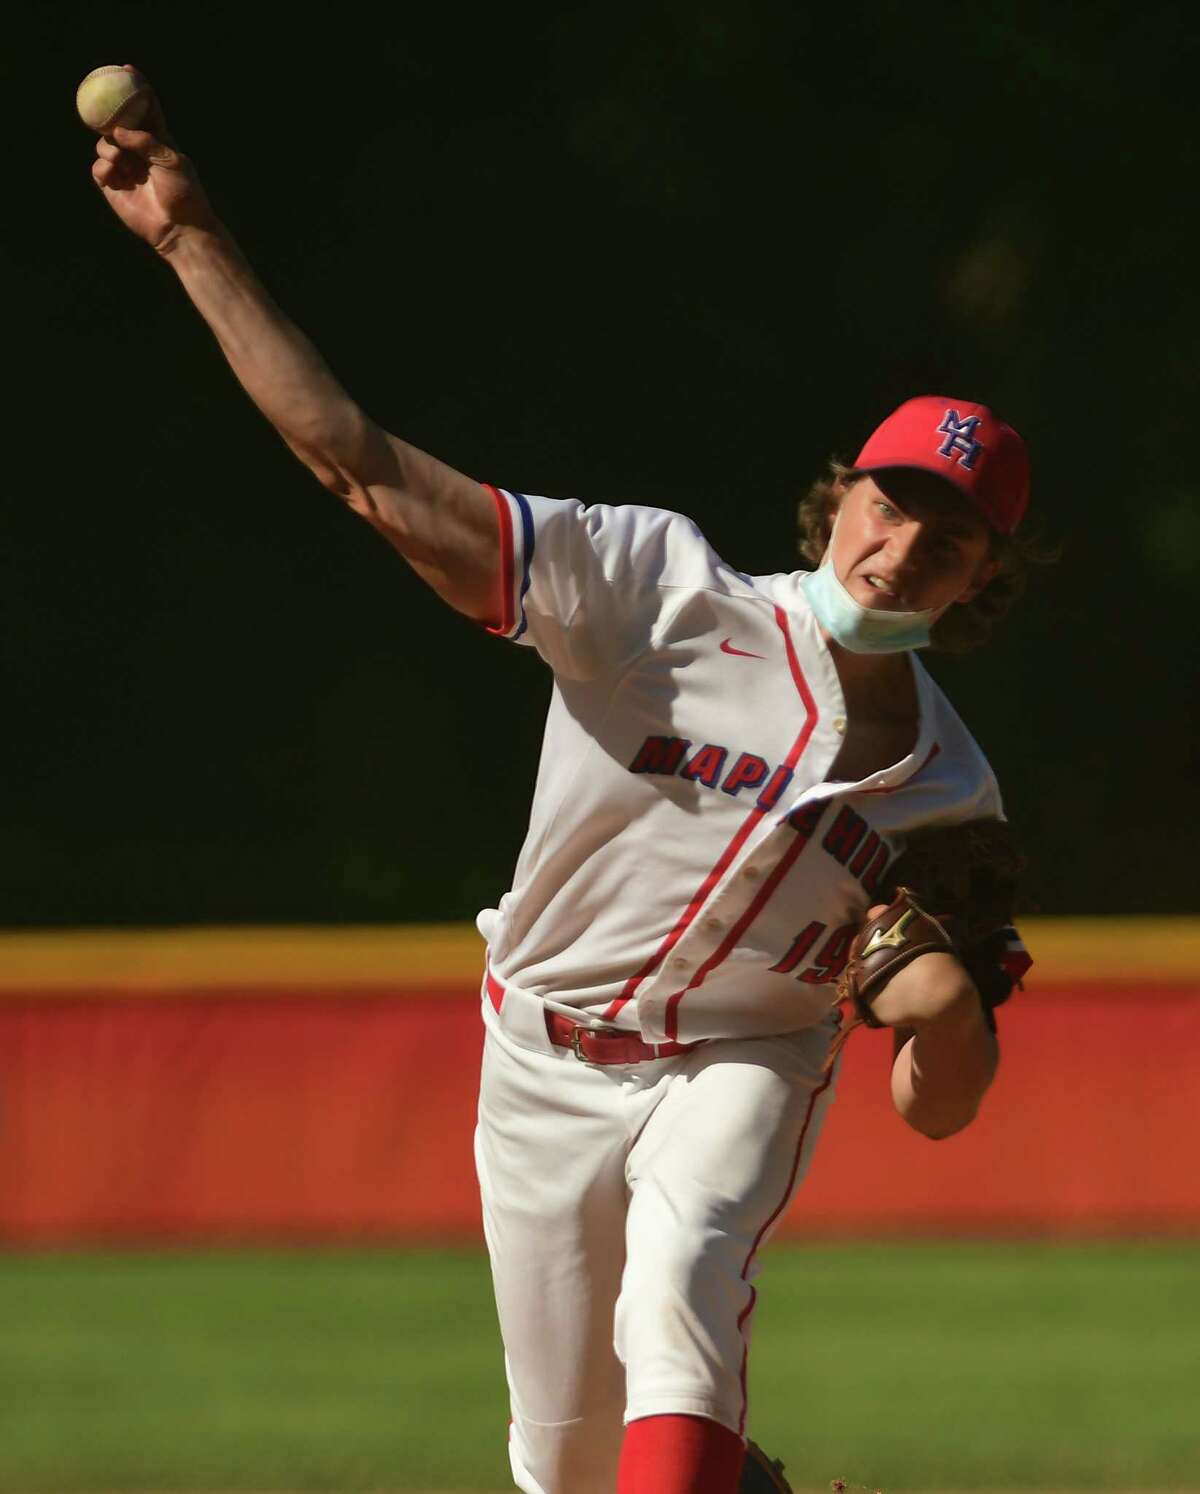 Maple Hill pitcher Gavin Van Kempen throws the ball during a baseball game against Coxsackie on Monday, May 24, 2021 in Schodack, N.Y. Van Kempe has orally committed to West Virginia. (Lori Van Buren/Times Union)